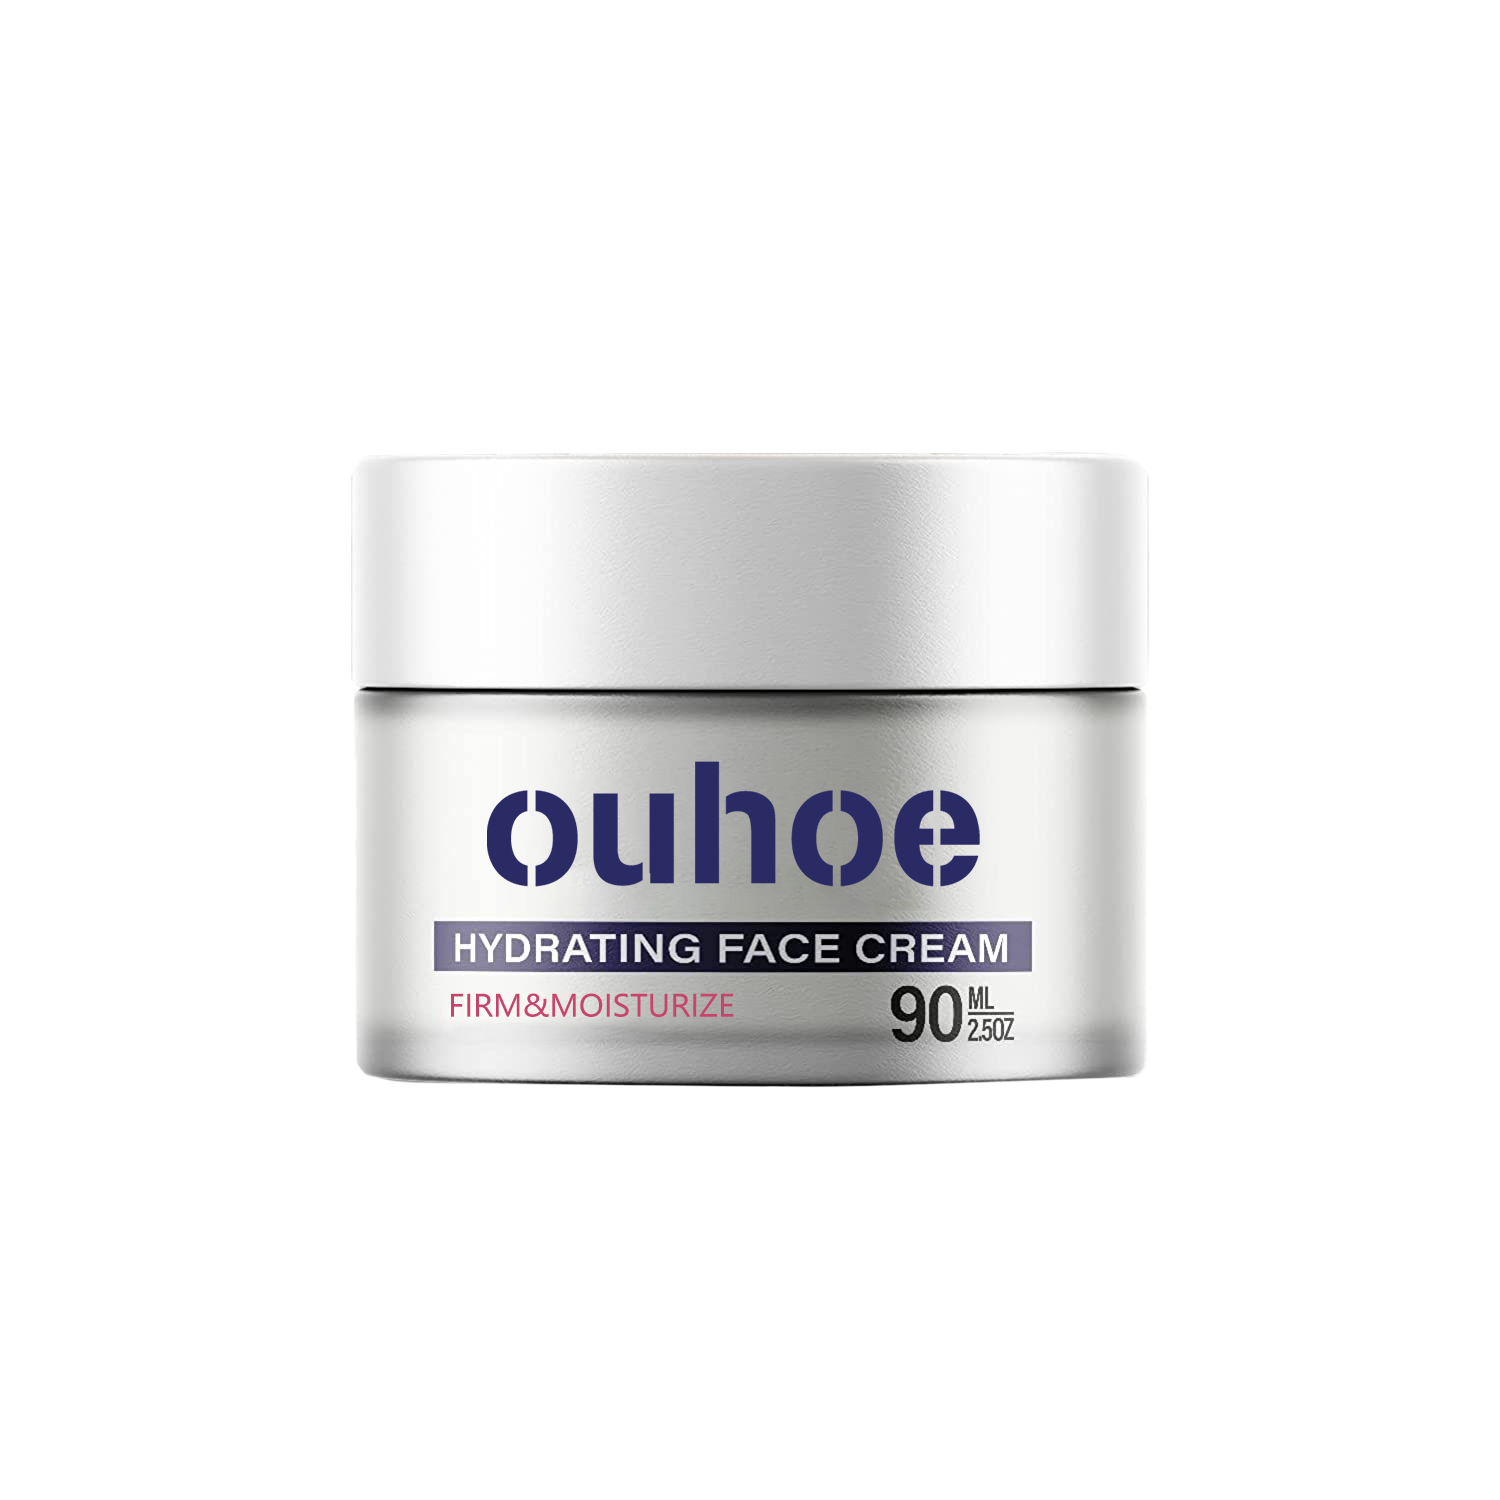 Ouhoe Moisturizing Facial Cream Spot Fading Fine Lines Moisture Replenishment Firming Tender and Smooth Skin Anti-Wrinkle Skin Care Cream